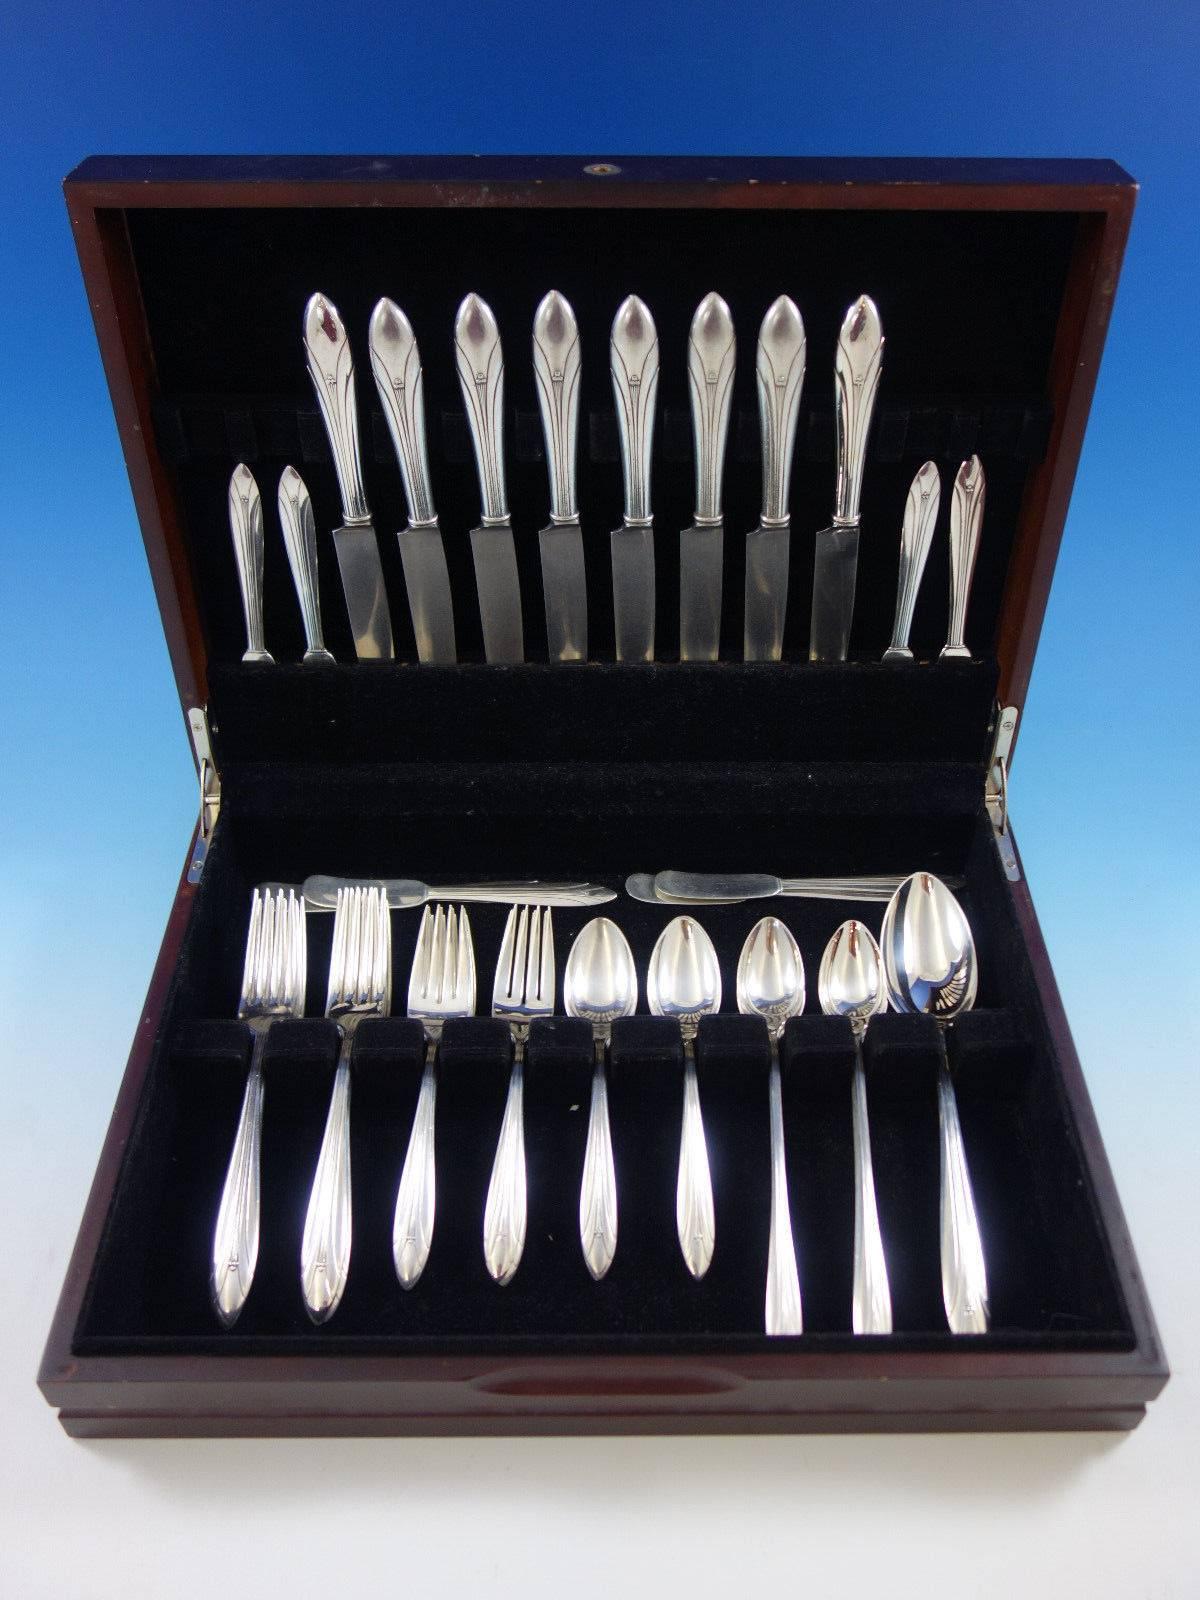 Elsinore by International Art Deco sterling silver flatware set - 49 pieces. This set includes: 

Eight knives, 8 3/4